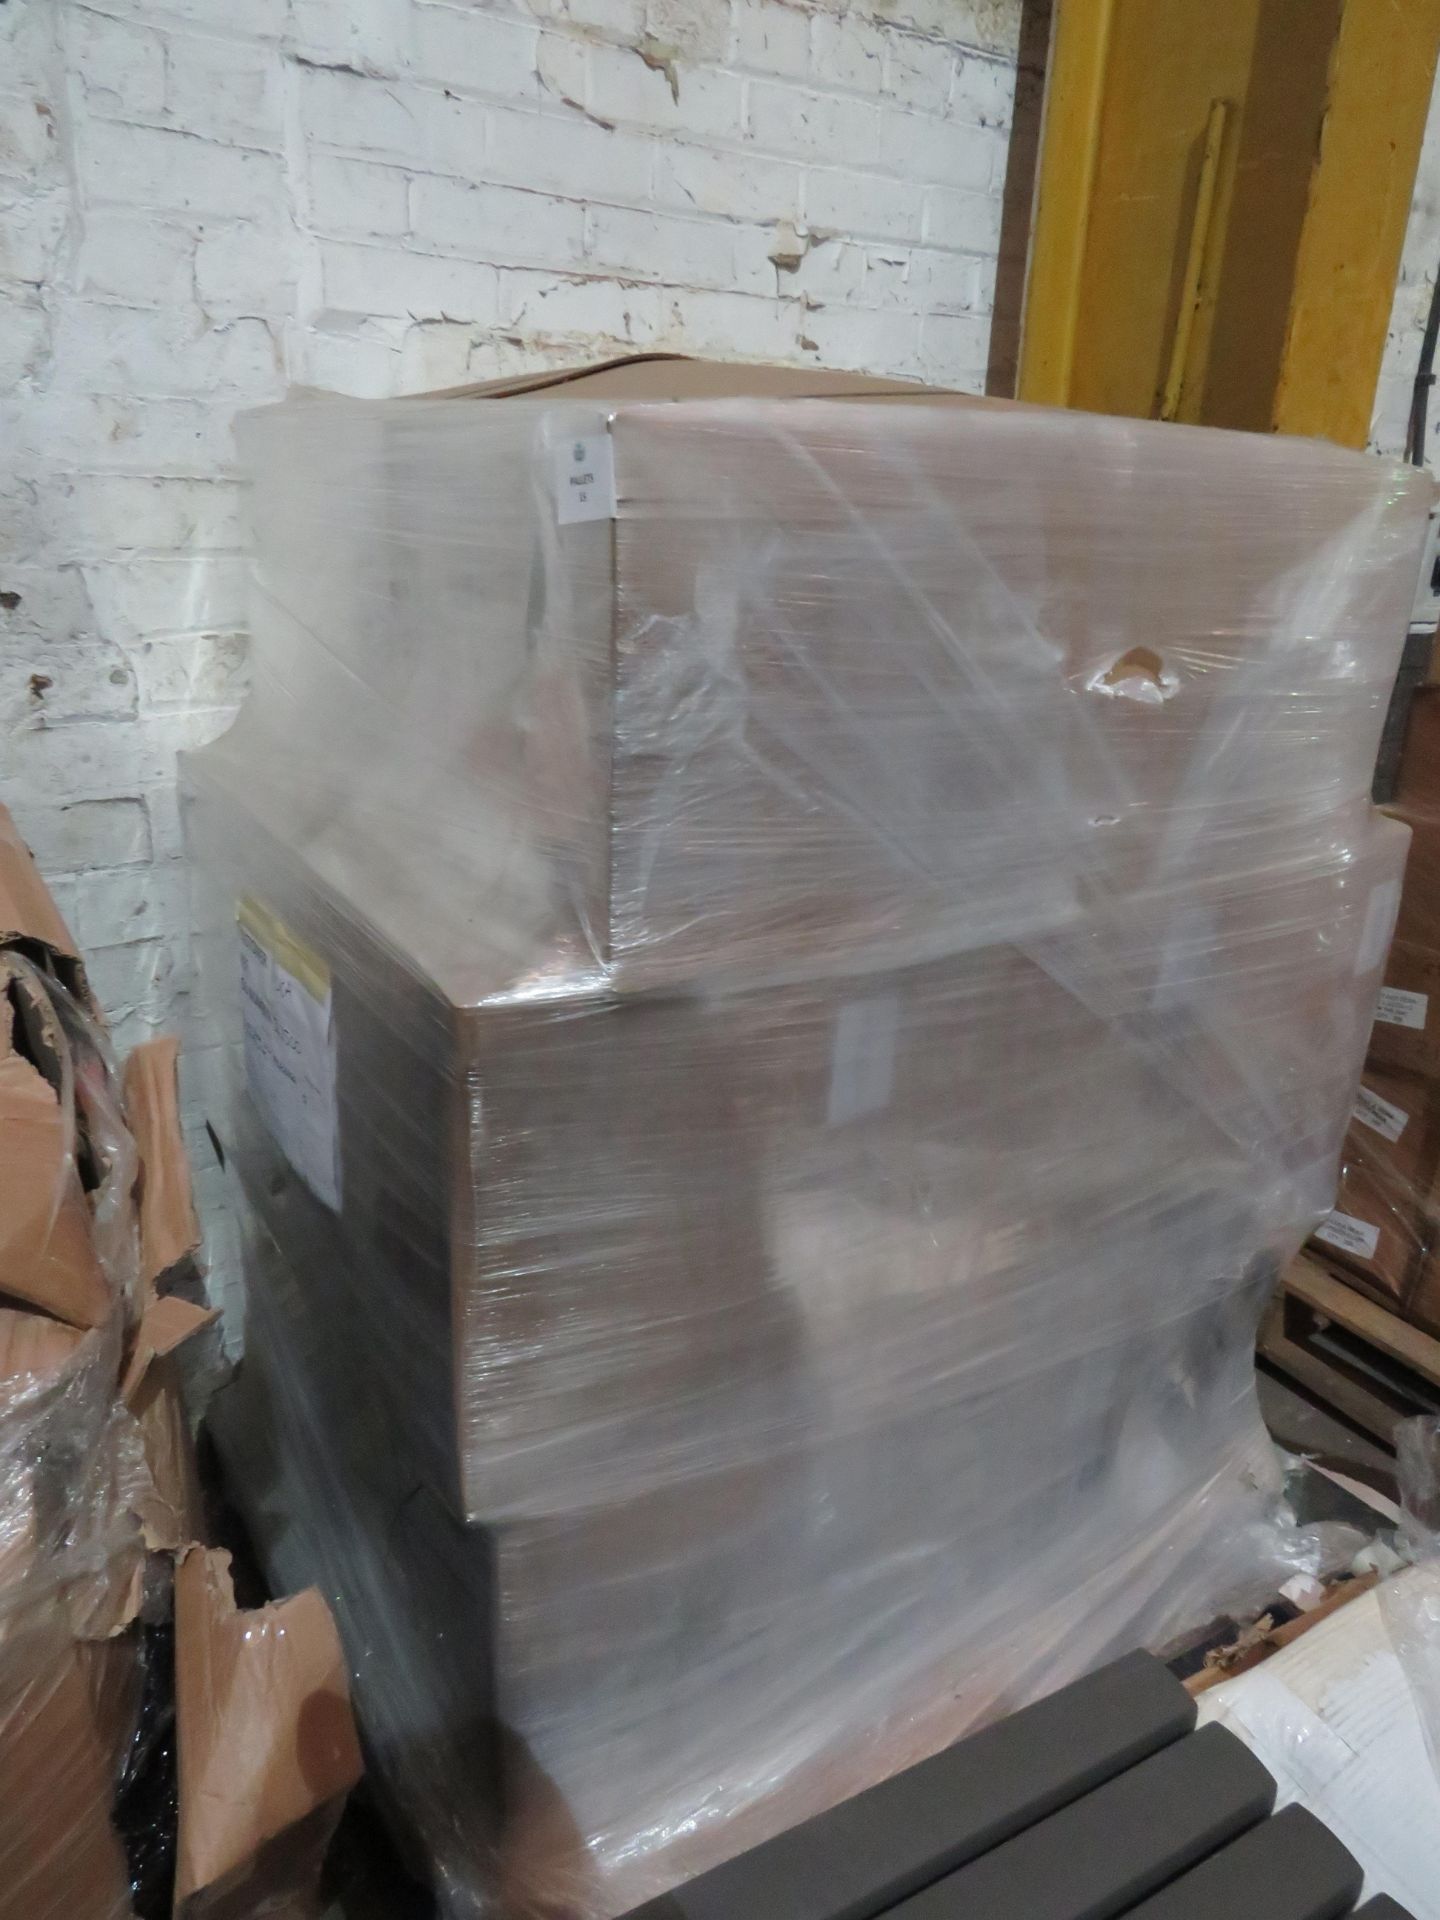 1x Pallet Containing 8x Roca - Gloss White 1-Door 400 Unit - New & Boxed.